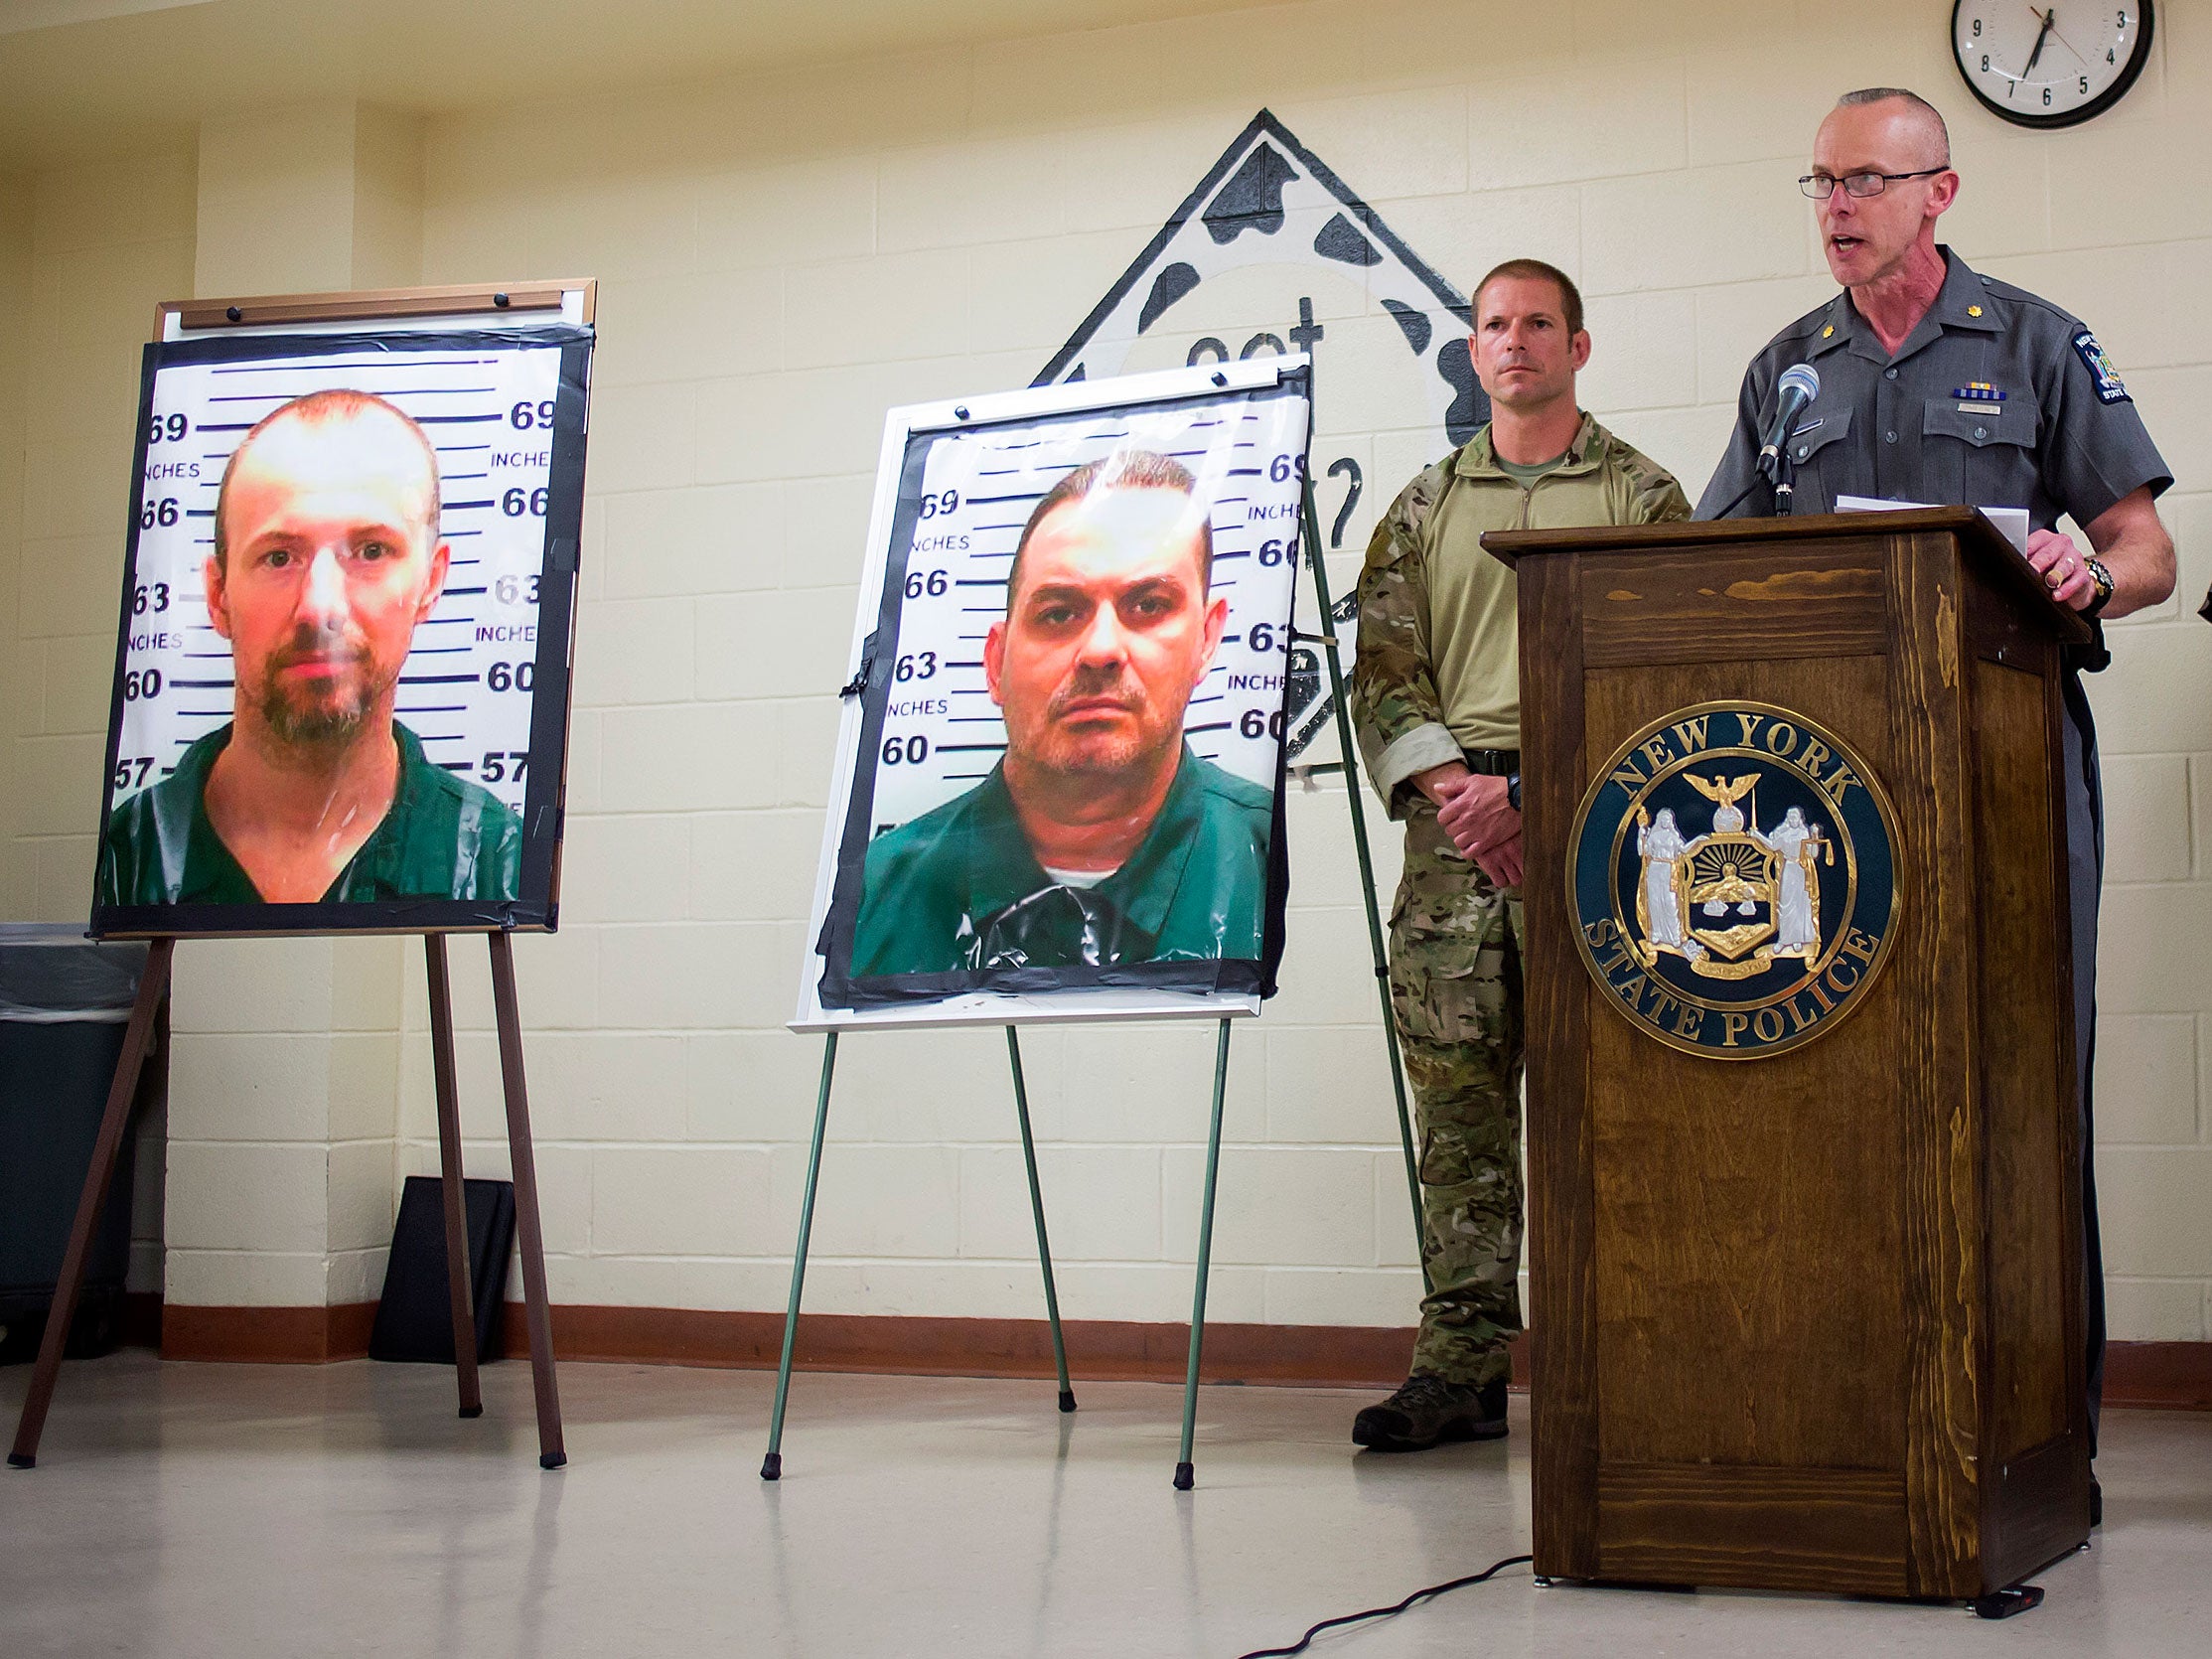 Major Charles Guess of the New York State Police speaks during a press conference after the escape of David Sweat and Richard Matt